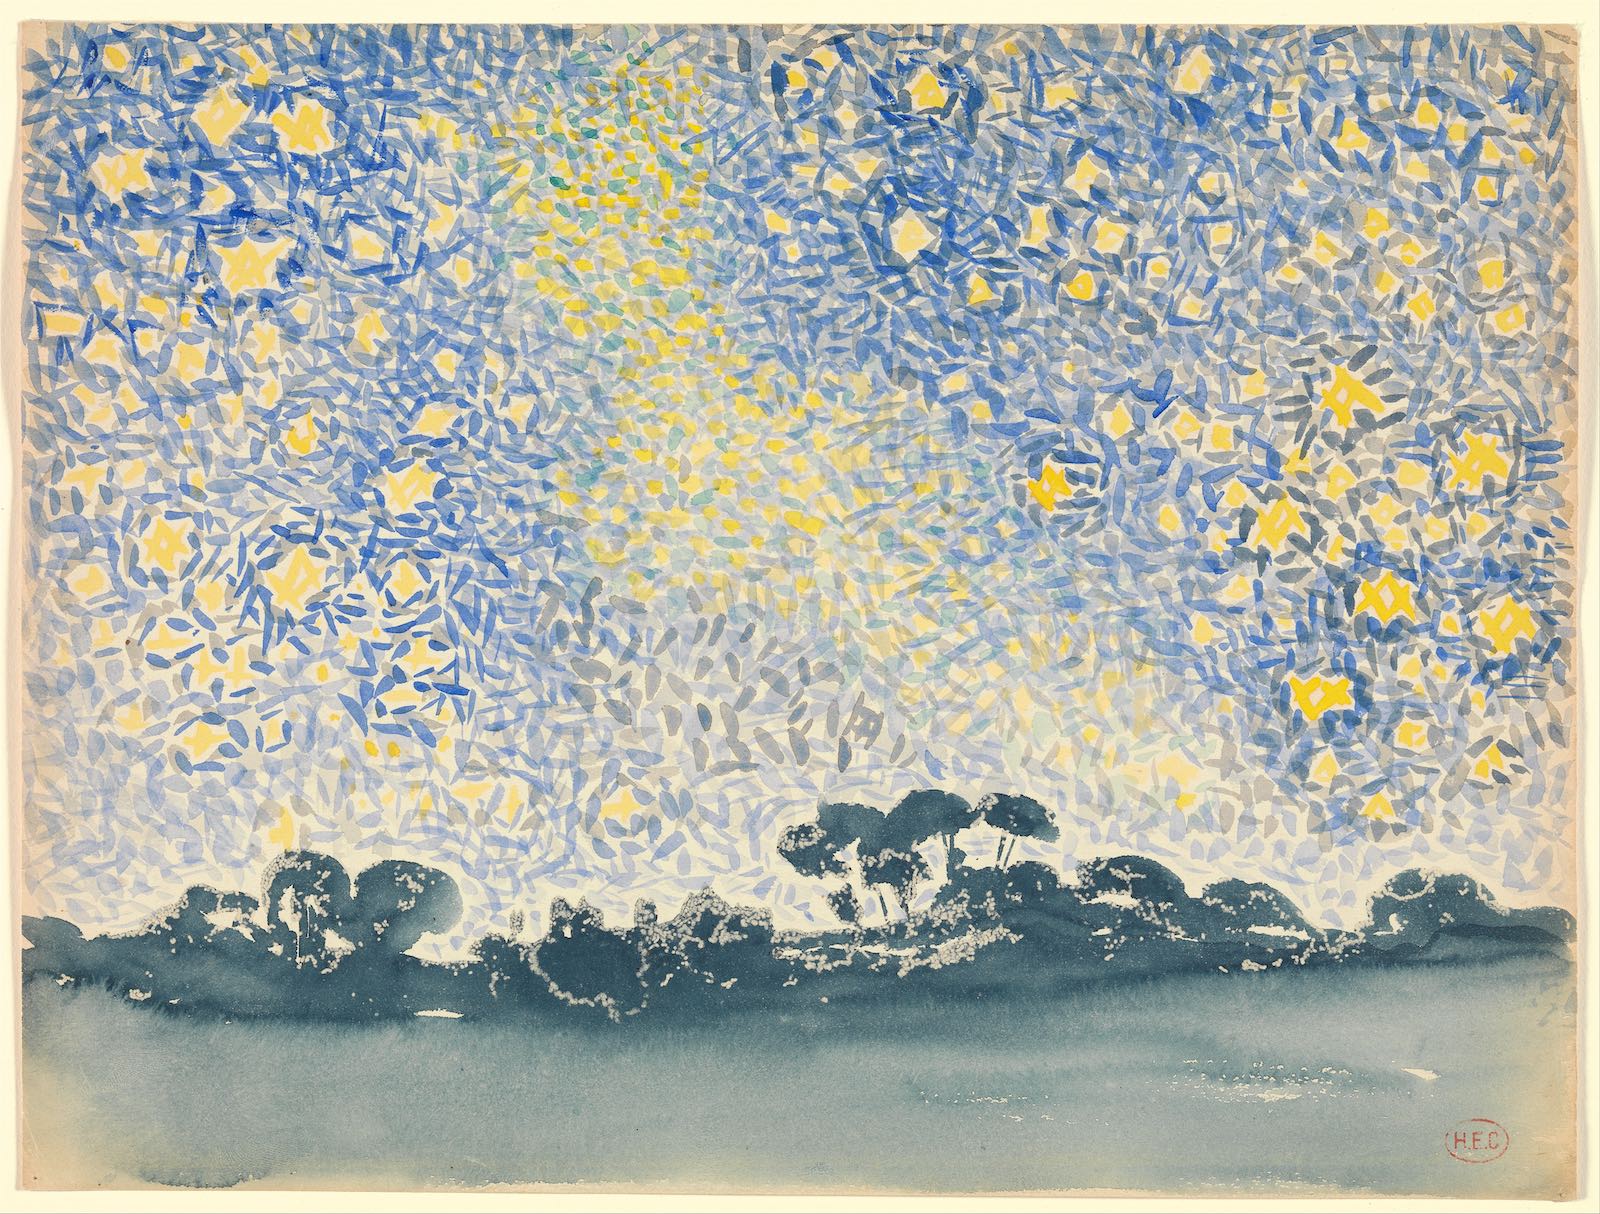 A watercolor painting of a blue night sky with large yellow stars.